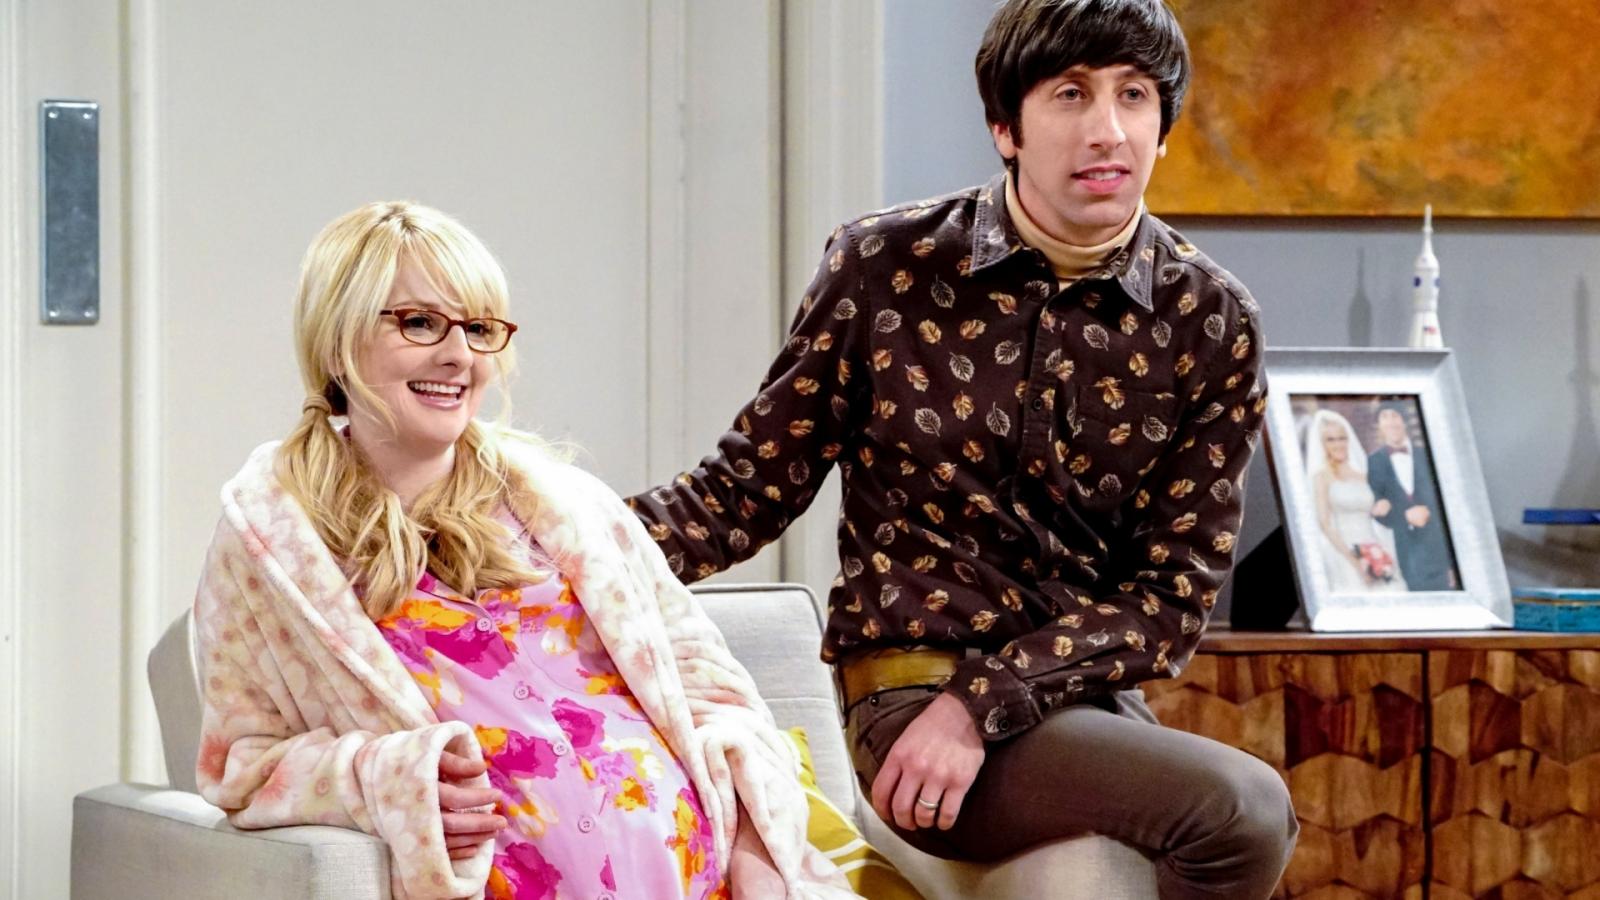 TBBT Character You'd Date, Marry, or Avoid Based on Your Zodiac Sign - image 2